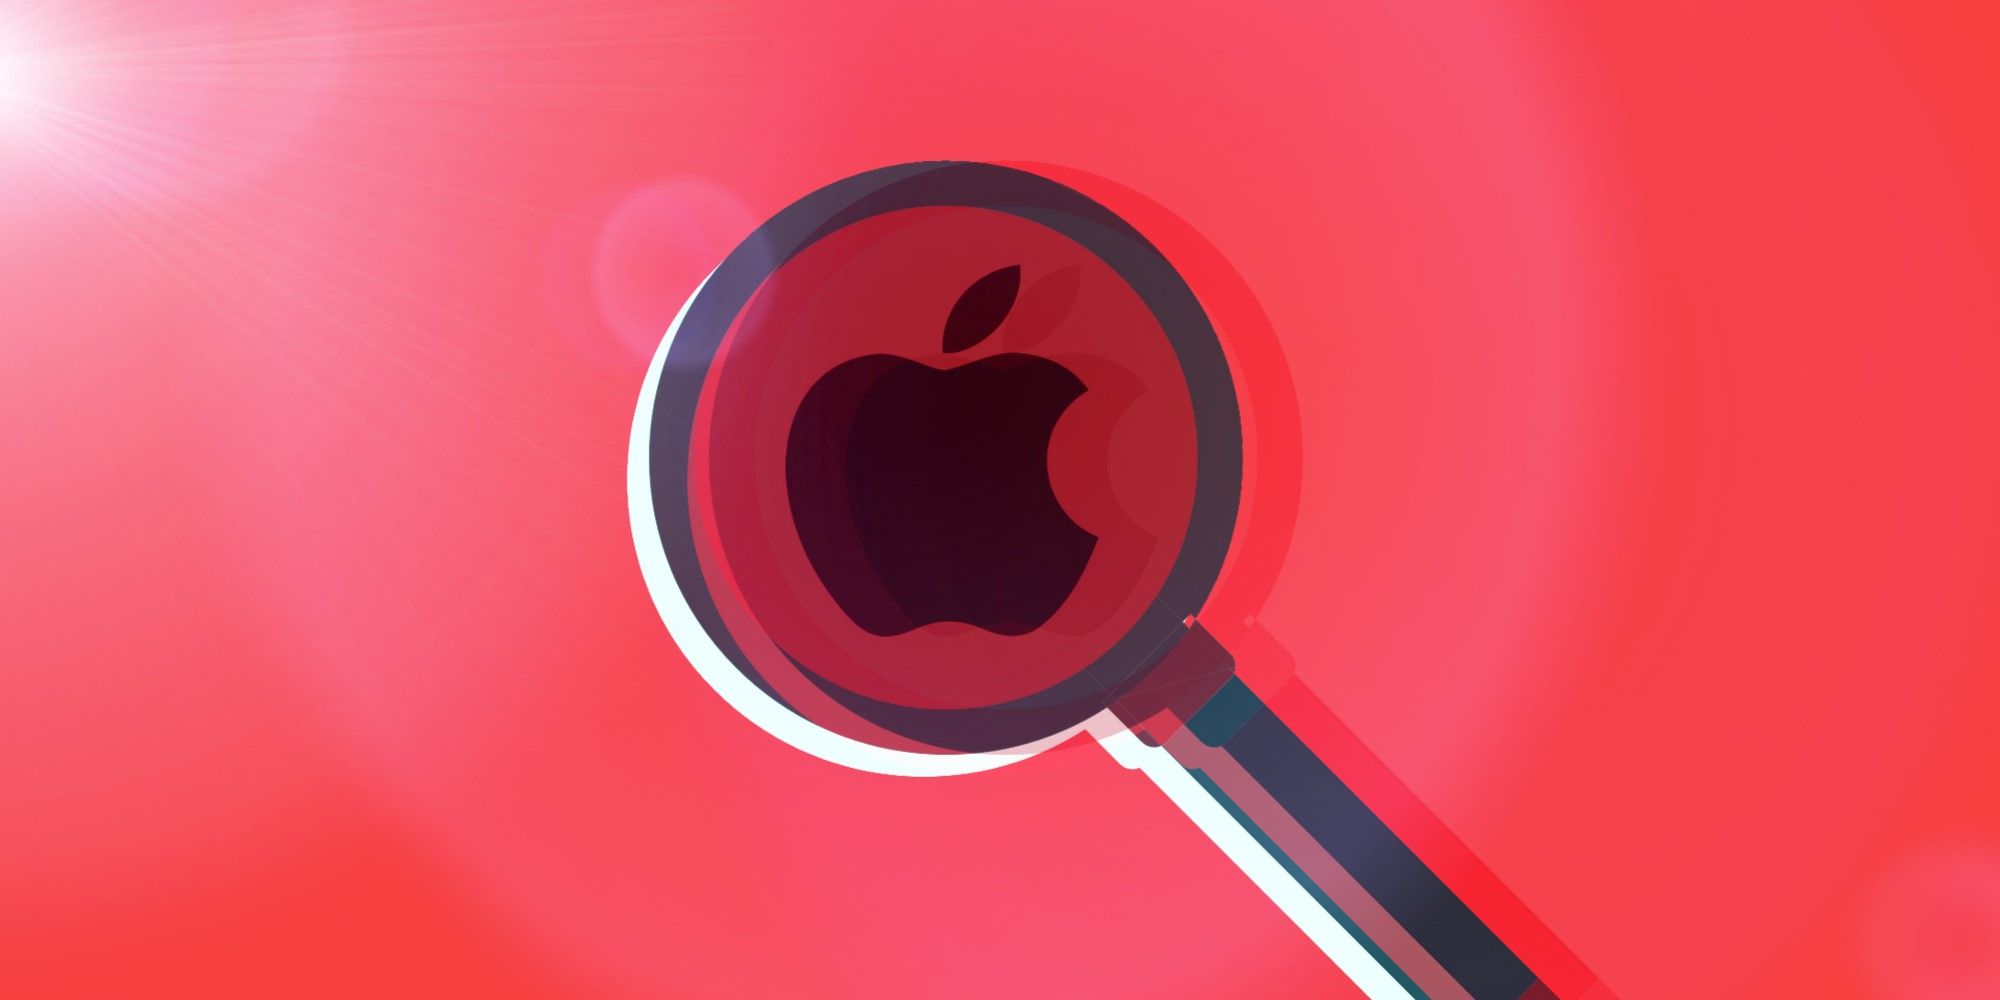 Apple Rebuts Privacy Concerns Over CSAM Photo Scanning